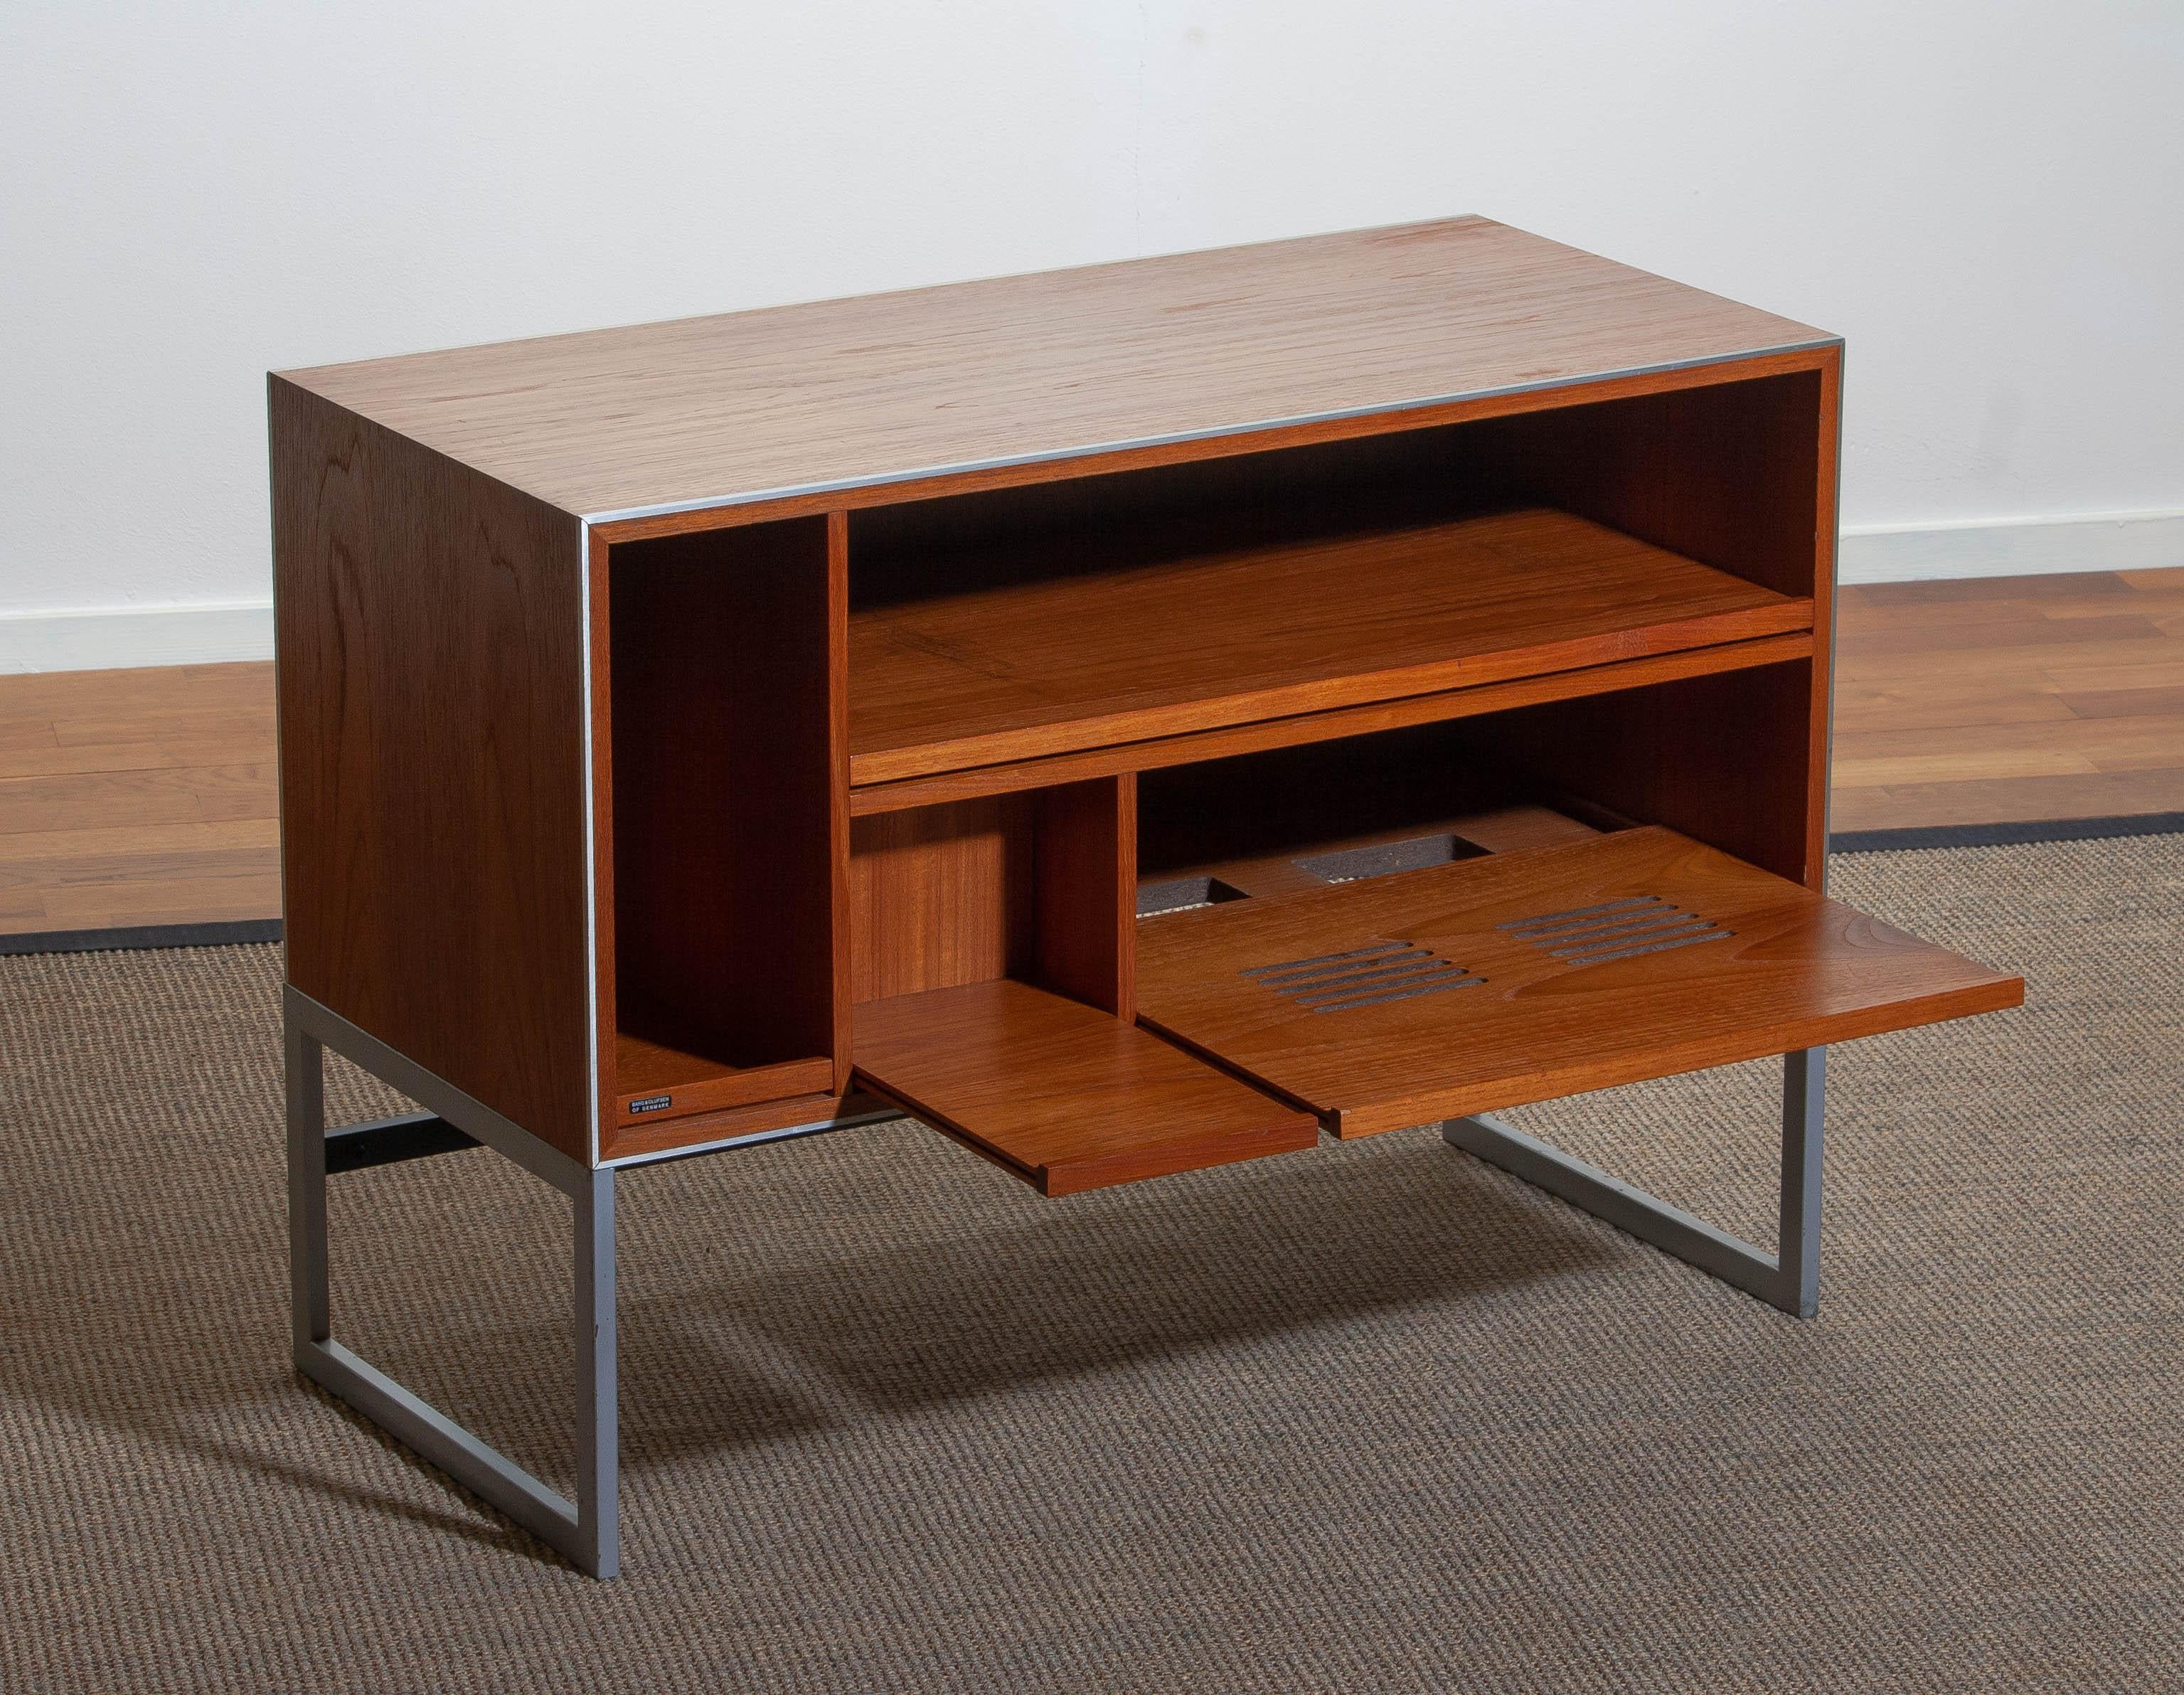 Excellent 1970s audio cabinet designed by Jacob Jensen for Bang & Olufsen in teak.
This media console is build up with three pullout / pull-out shelves with discreet cord channeling at bottom to conceal wires, with vinyl storage compartment on the